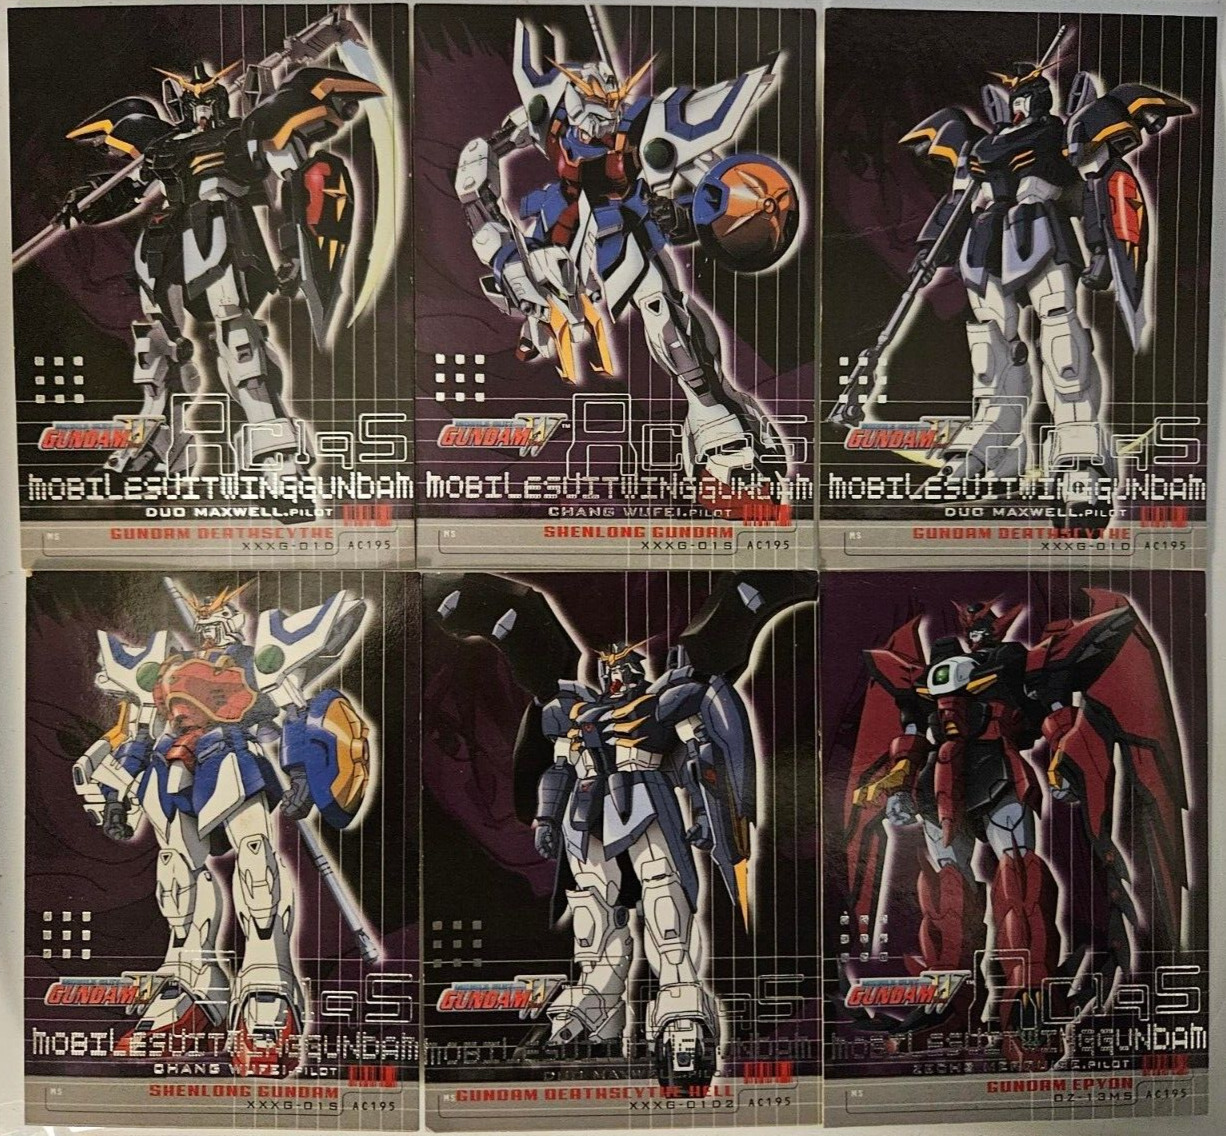 2000 Upper Deck Bandai Gundam Wing Mobile Suit LOT x6 Trading Cards